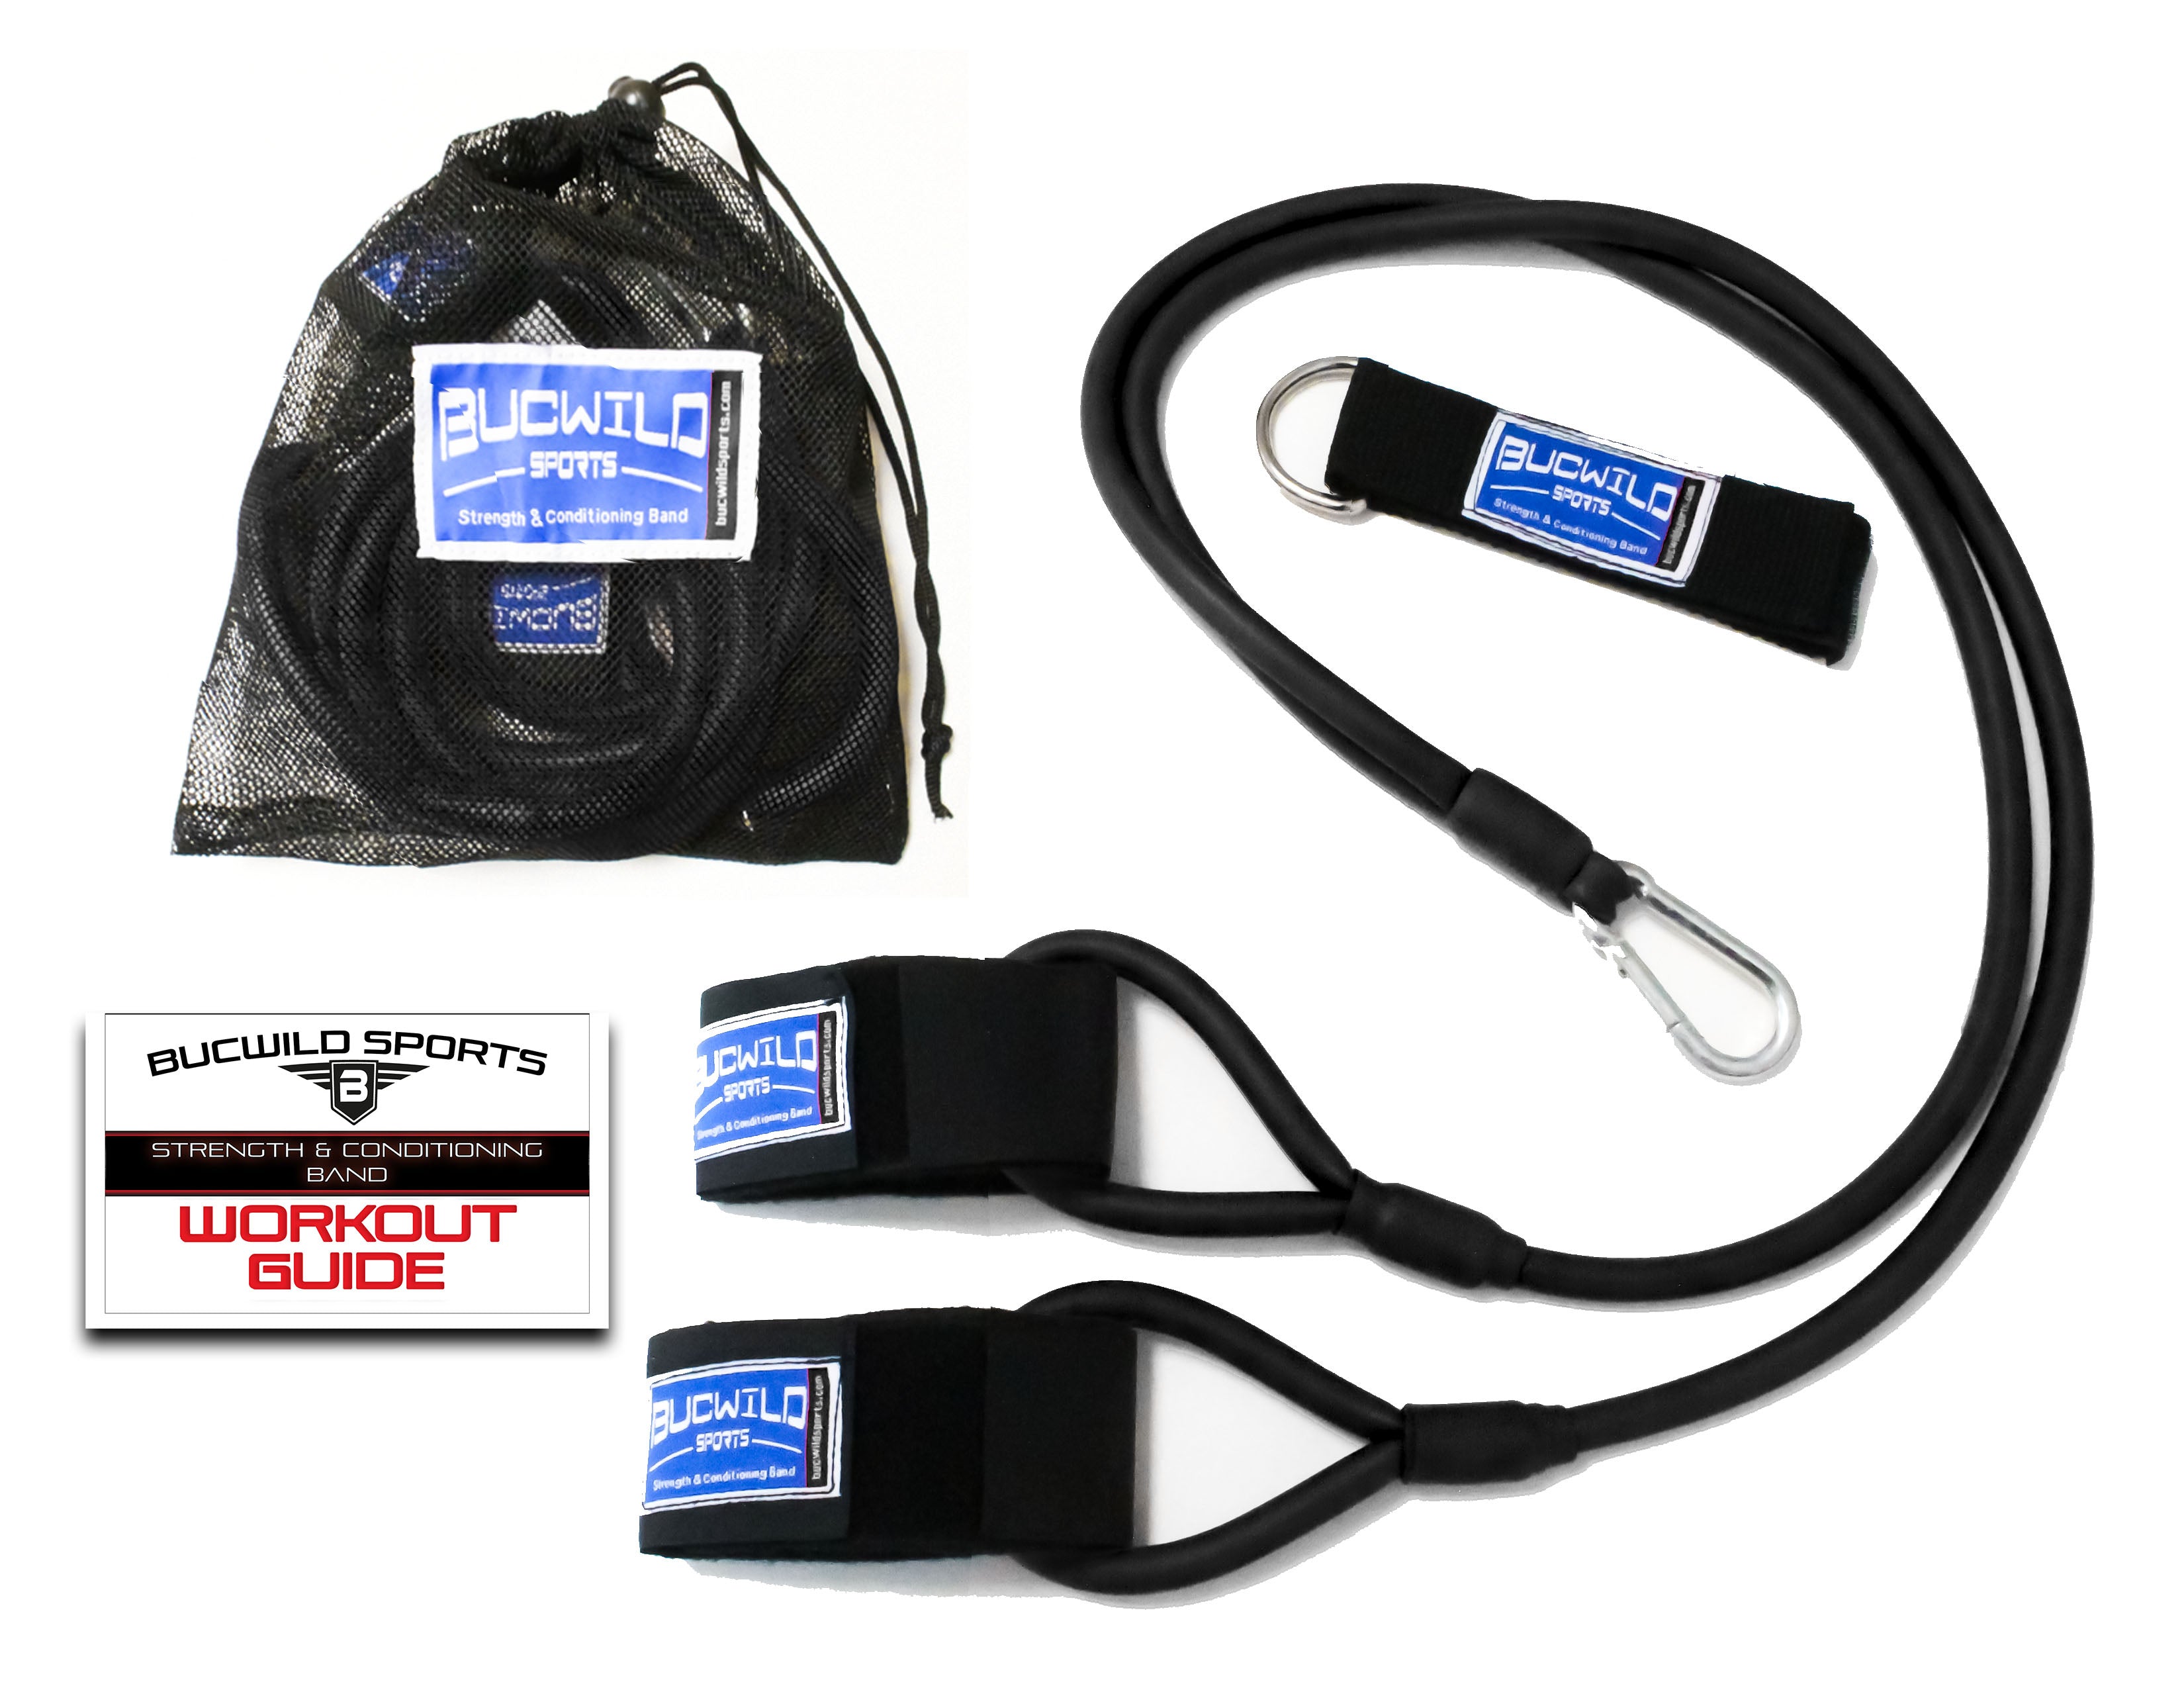 Strength & Conditioning Resistance Band (Baseball Bands) Black Ages 12 & Under